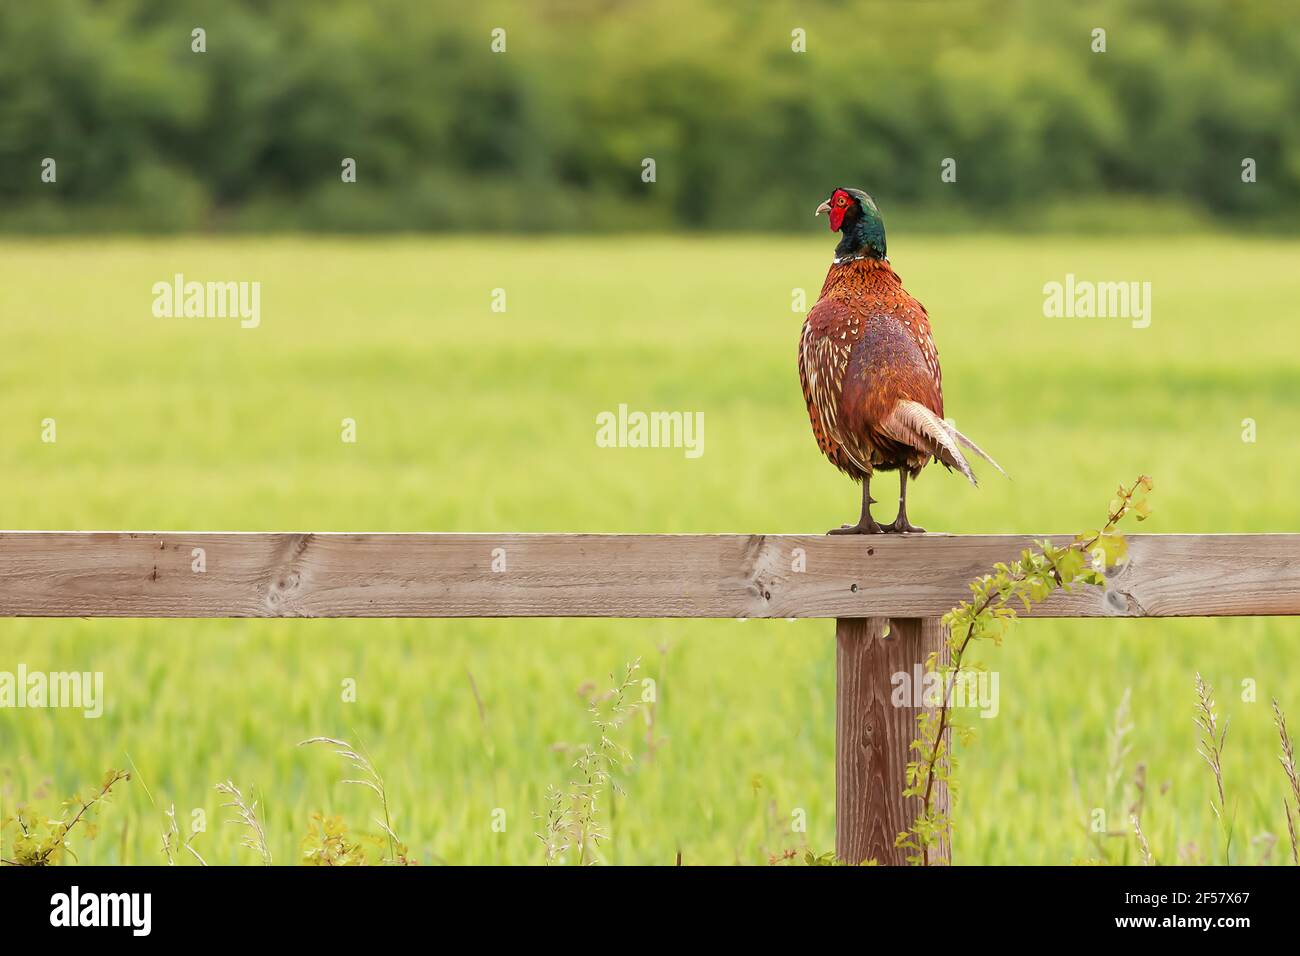 Beautiful male pheasant perched on a wooden fence looking over a green field landscape. Wild game bird in Norfolk England Stock Photo